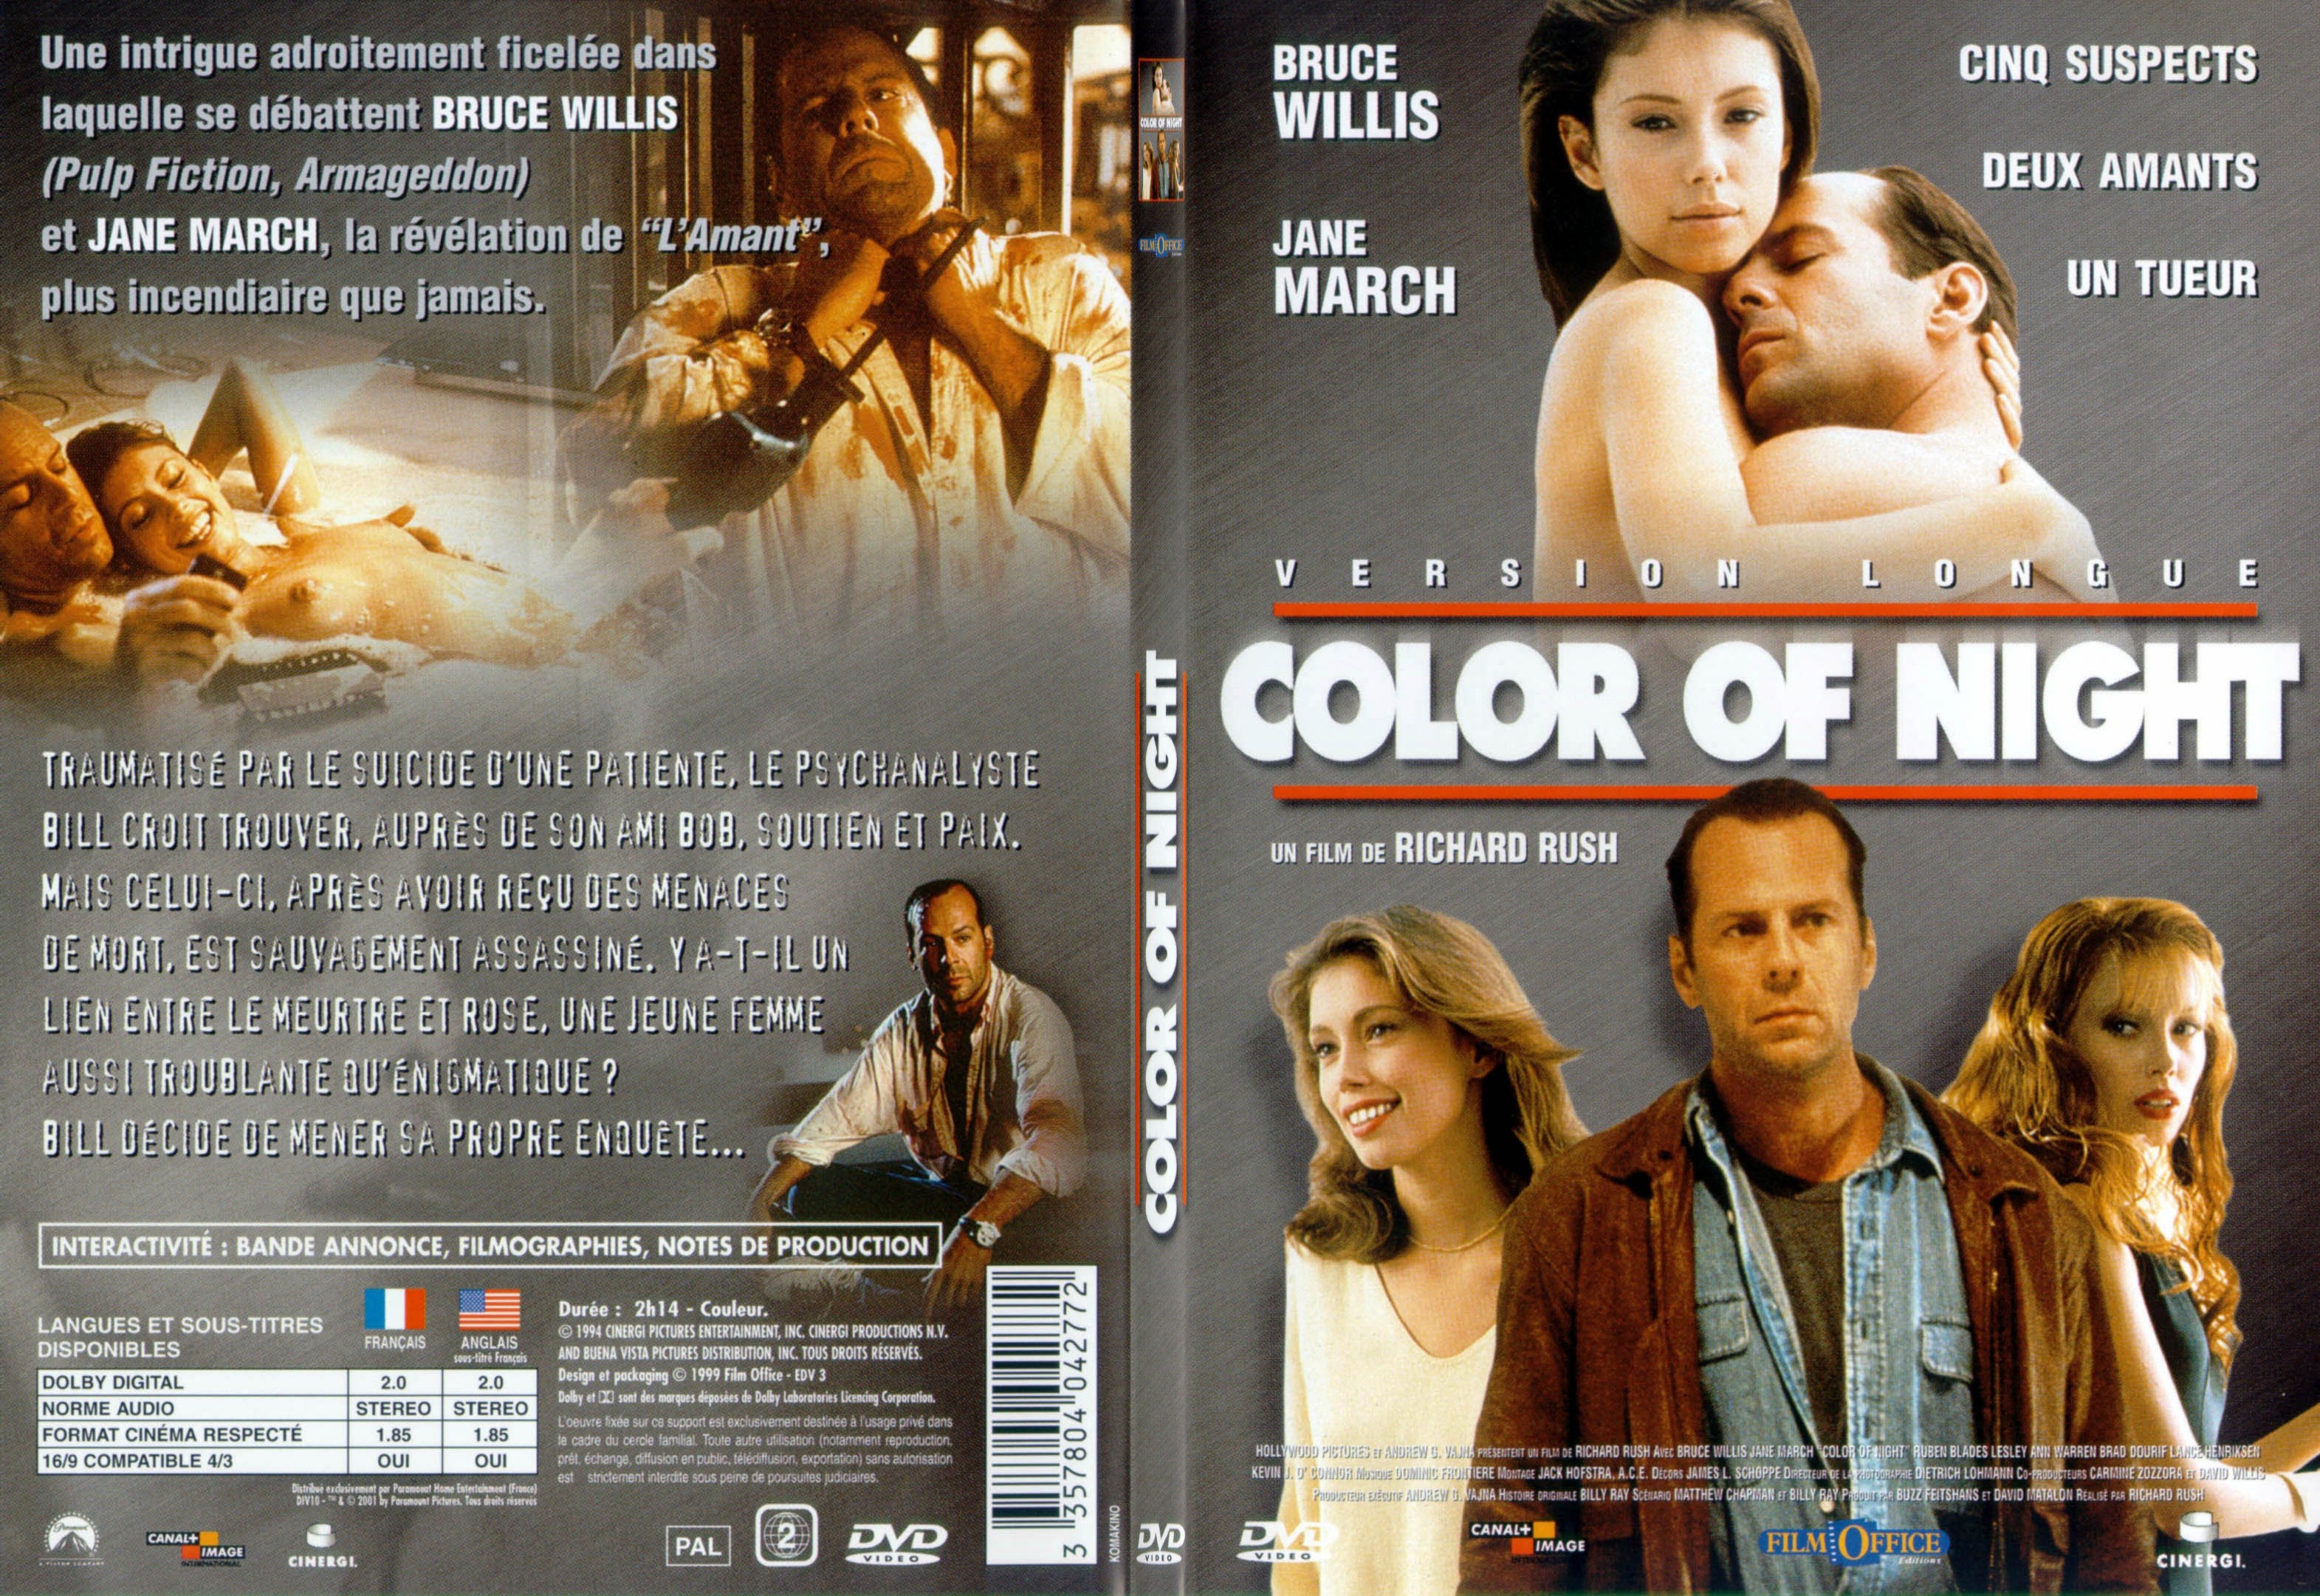 Jaquette DVD Color of night - SLIM